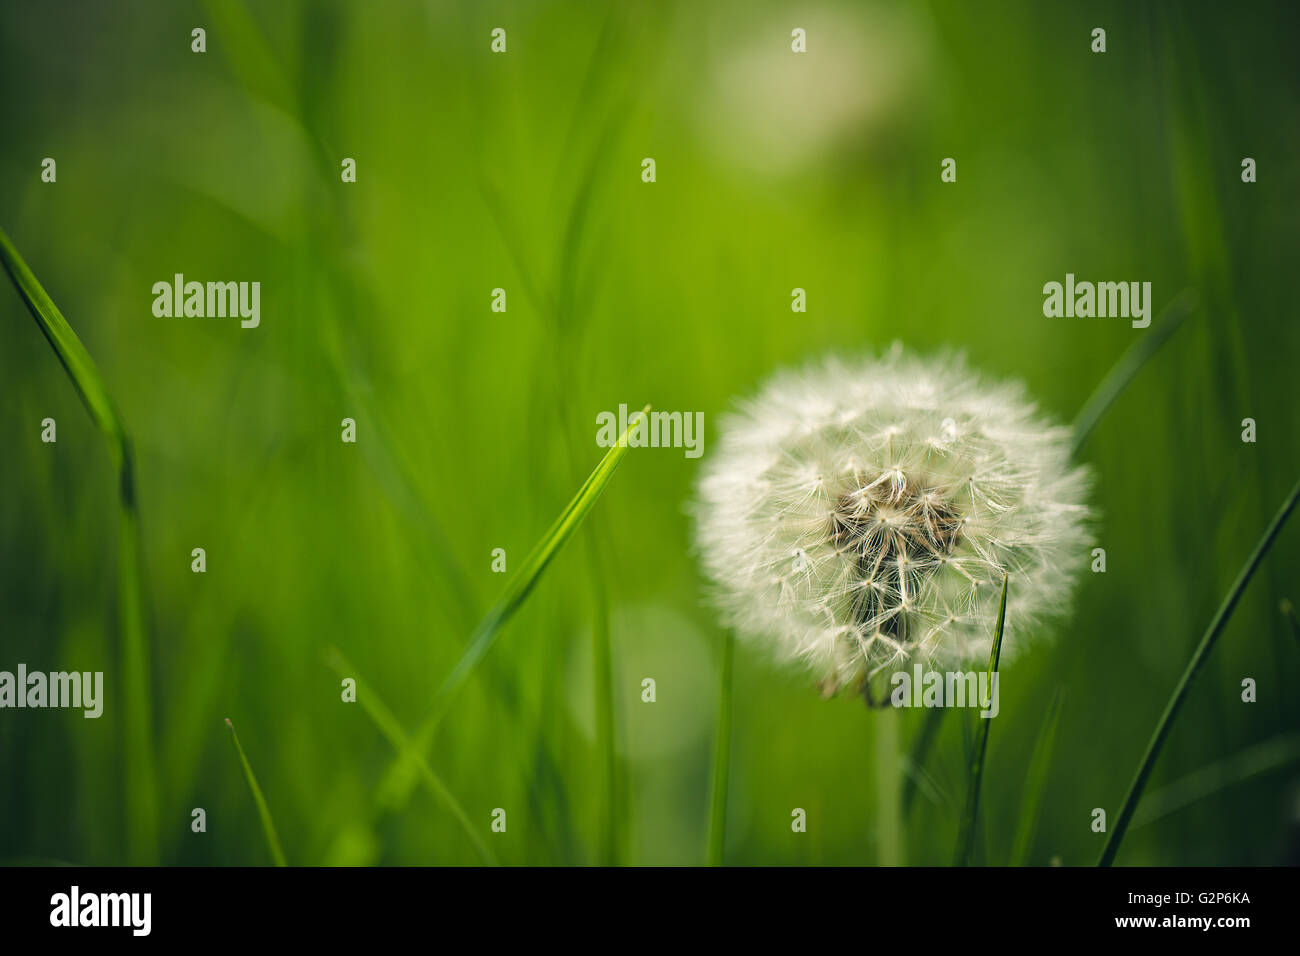 Bright green Meadow with Dandelion Blowballs in Summer Stock Photo